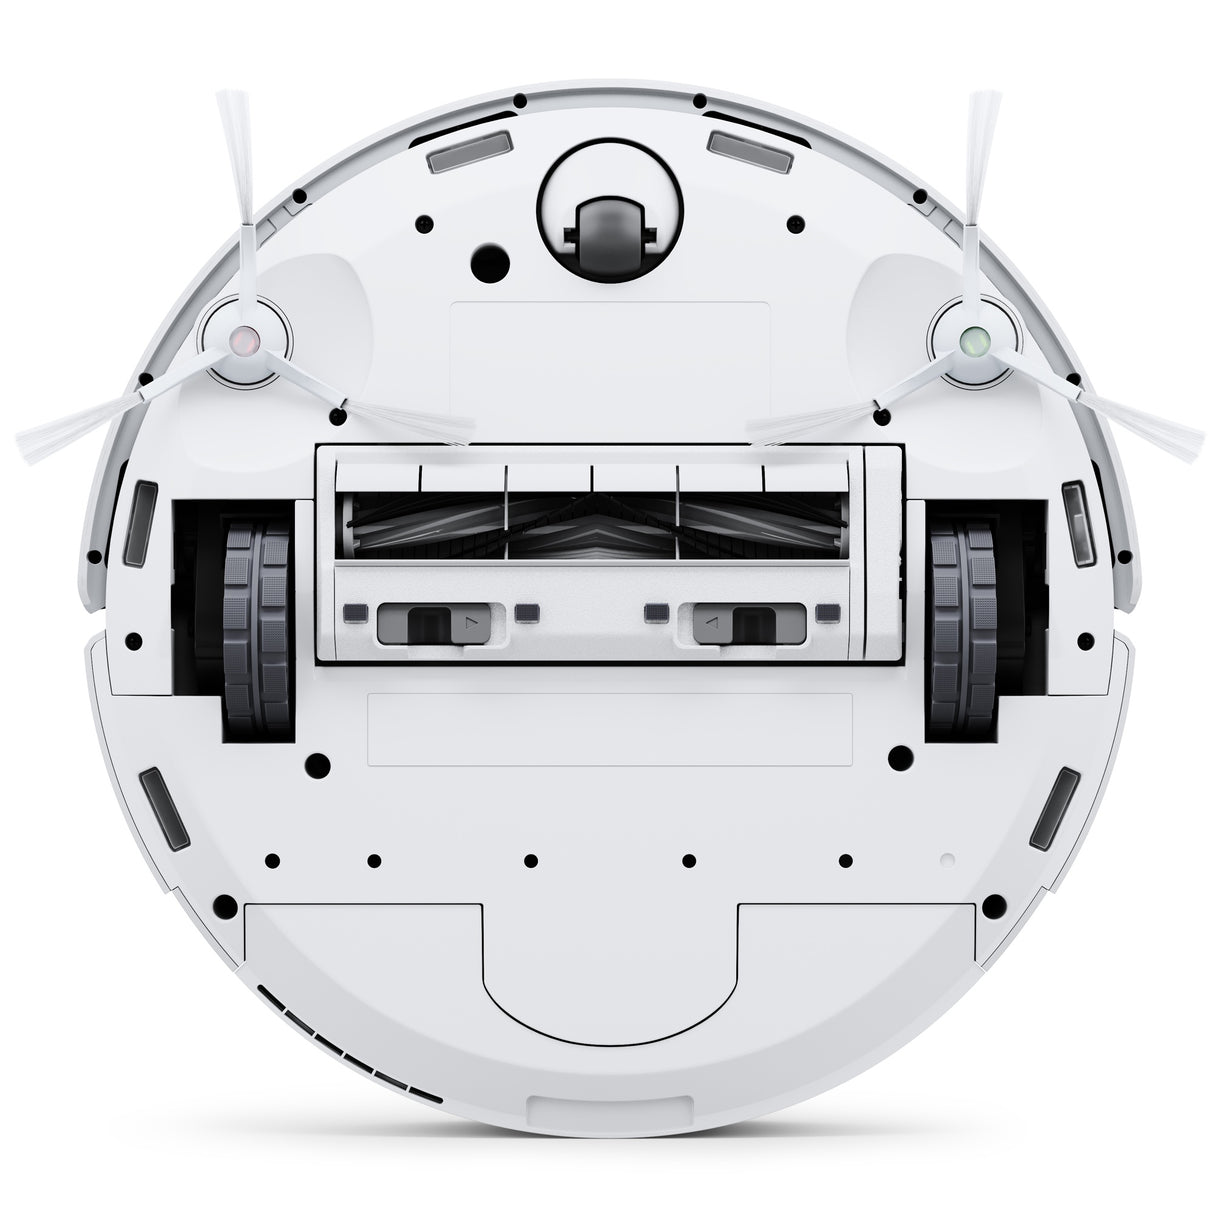 DEEBOT T10 PLUS Robot Vacuum Cleaner - 3000Pa, 260min Runtime